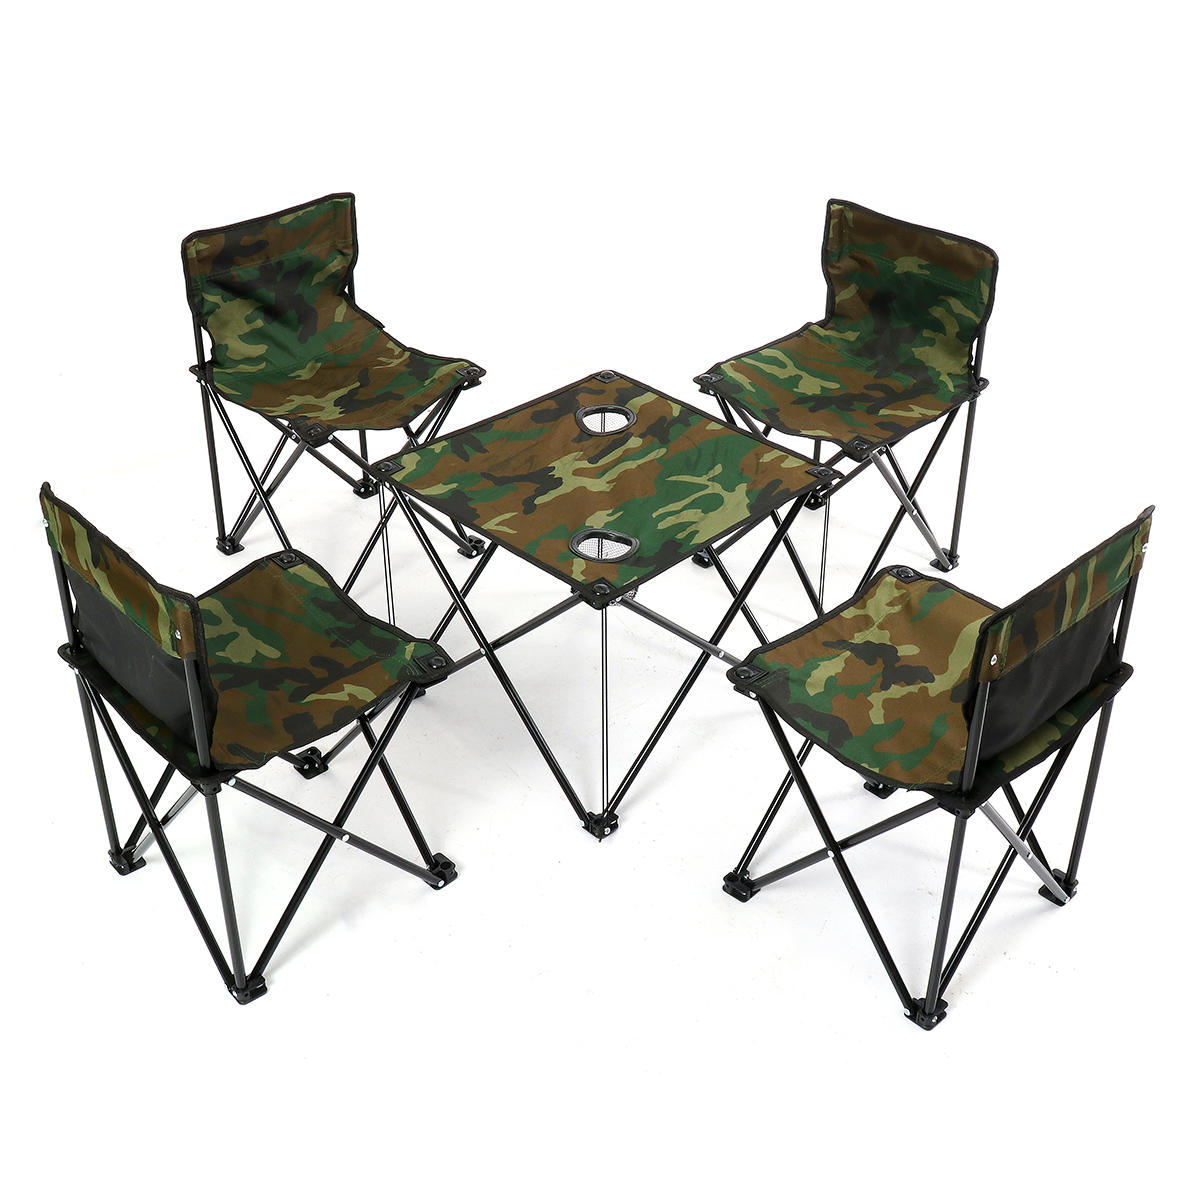 Portable Foldable Chair Table Desk Set with Carry Bag for Camping, Sporting Events, Beach